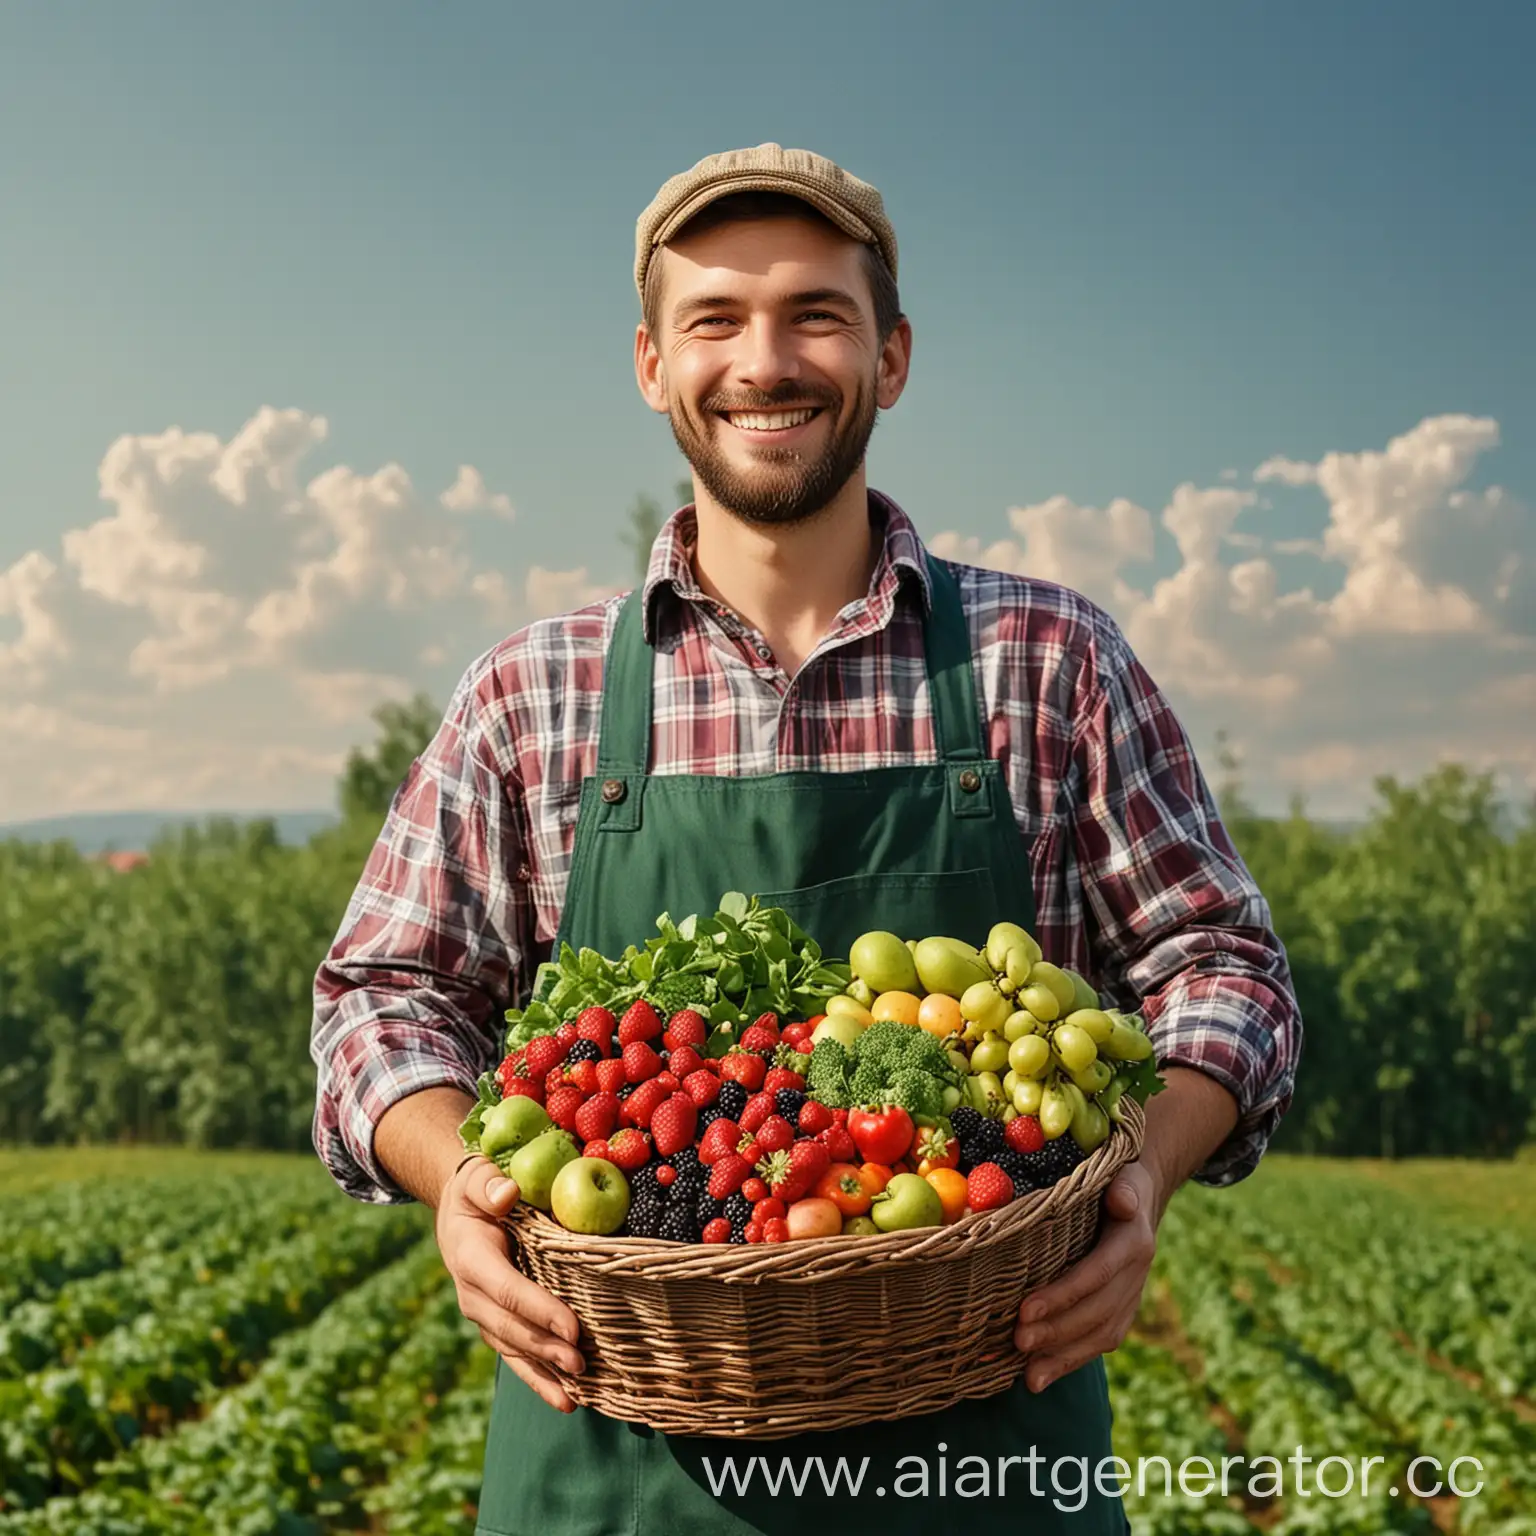 Realistic farmer in a green apron. In his hands he holds a basket with a rich harvest. In the basket: berries, vegetables and fruits. The farmer is smiling and happy about his rich harvest.